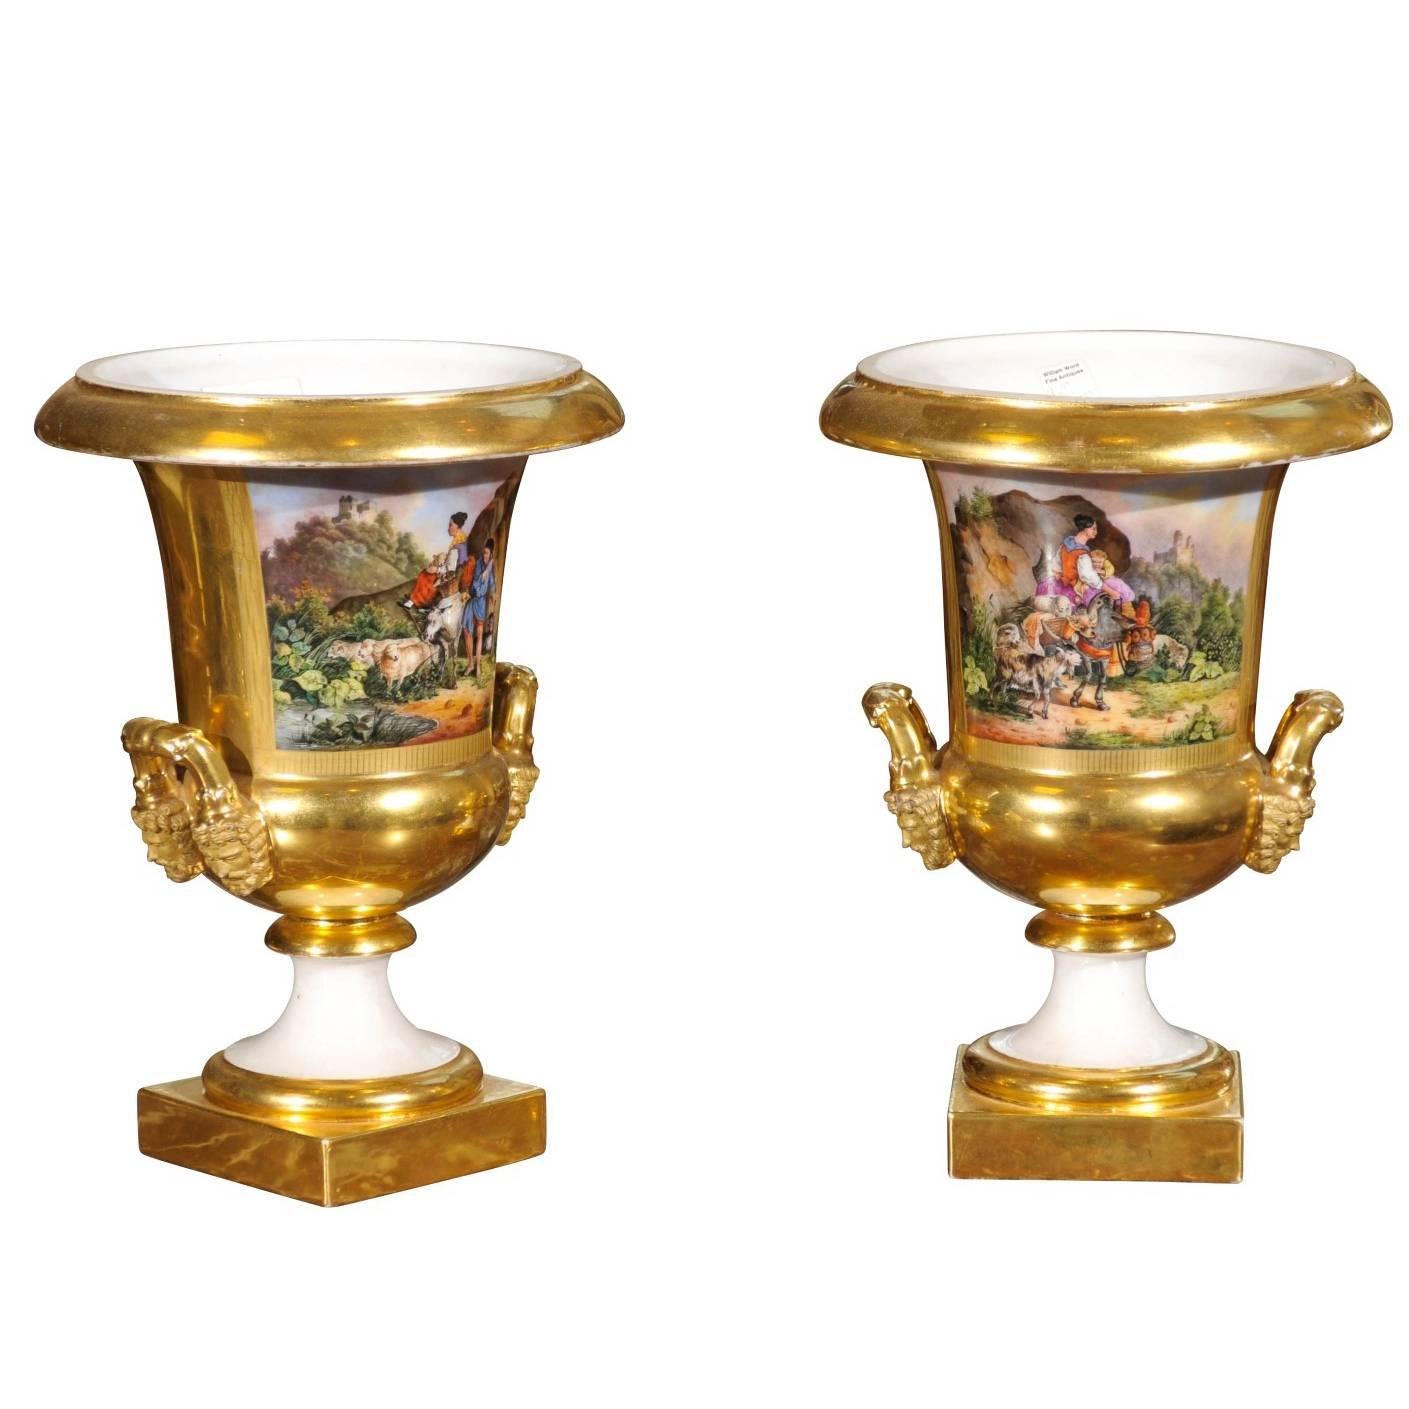 Pair of 19th Century French Paris Porcelain Urns with Painted Scenes & Handles